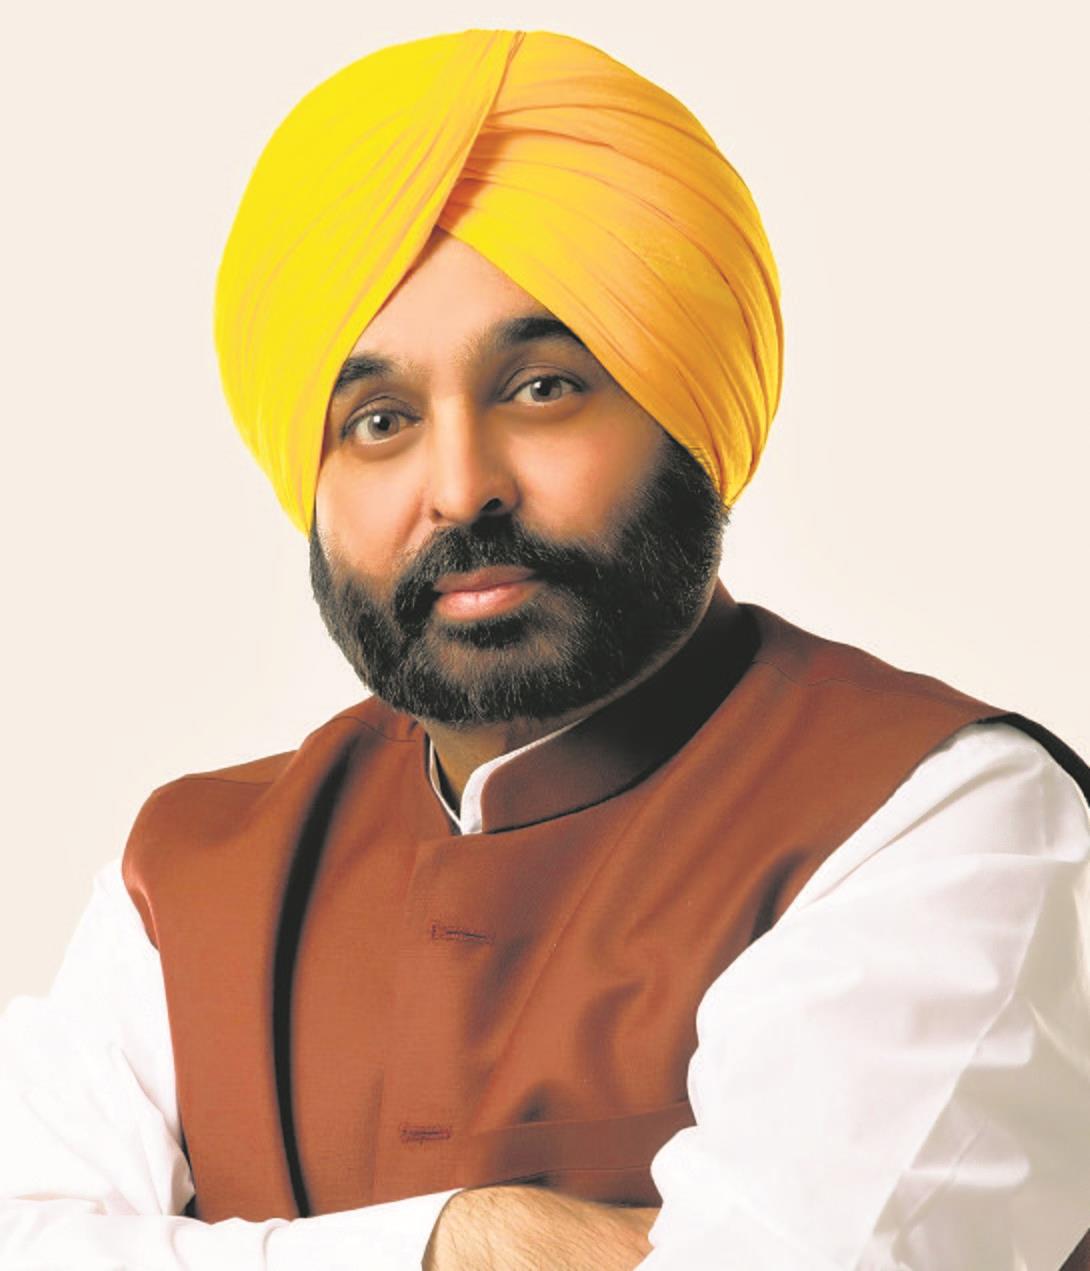 For graft-free Punjab, not even ministers spared: CM Bhagwant Mann